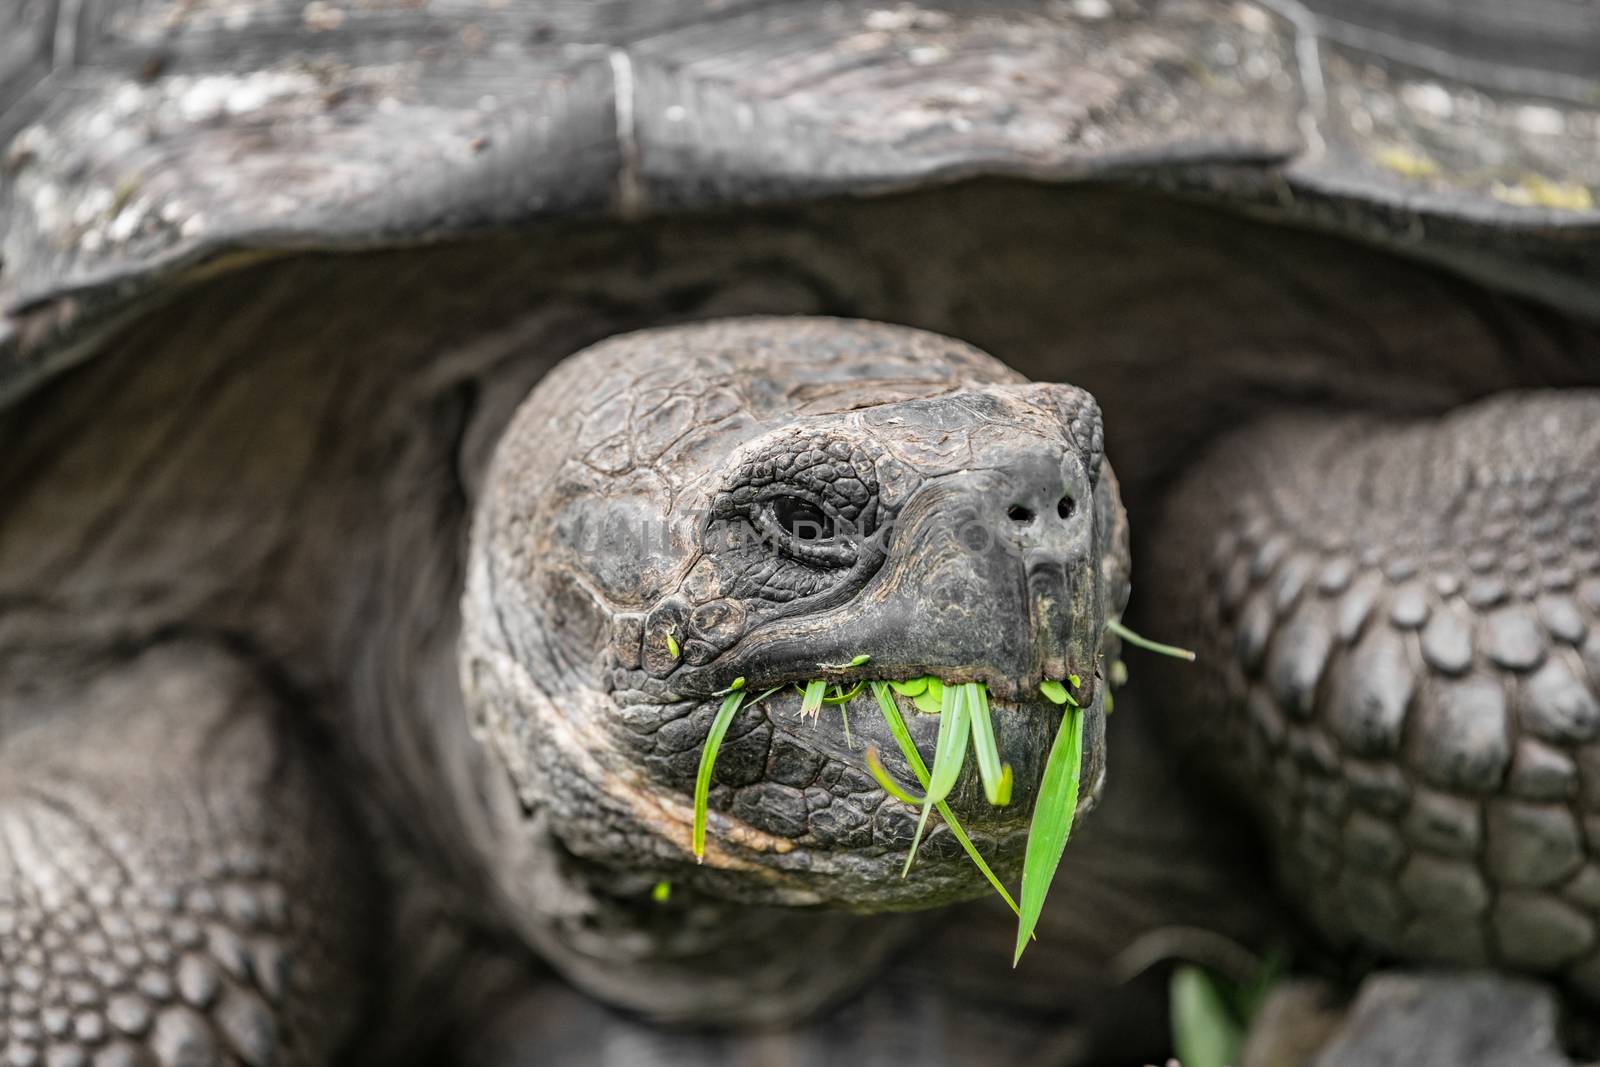 Galapagos Giant Tortoise eating grass on Santa Cruz Island in Galapagos Islands. Galapagos Tortoises are iconic to and only found Galapagos. Animals, nature and wildlife nature from Galapagos Islands.